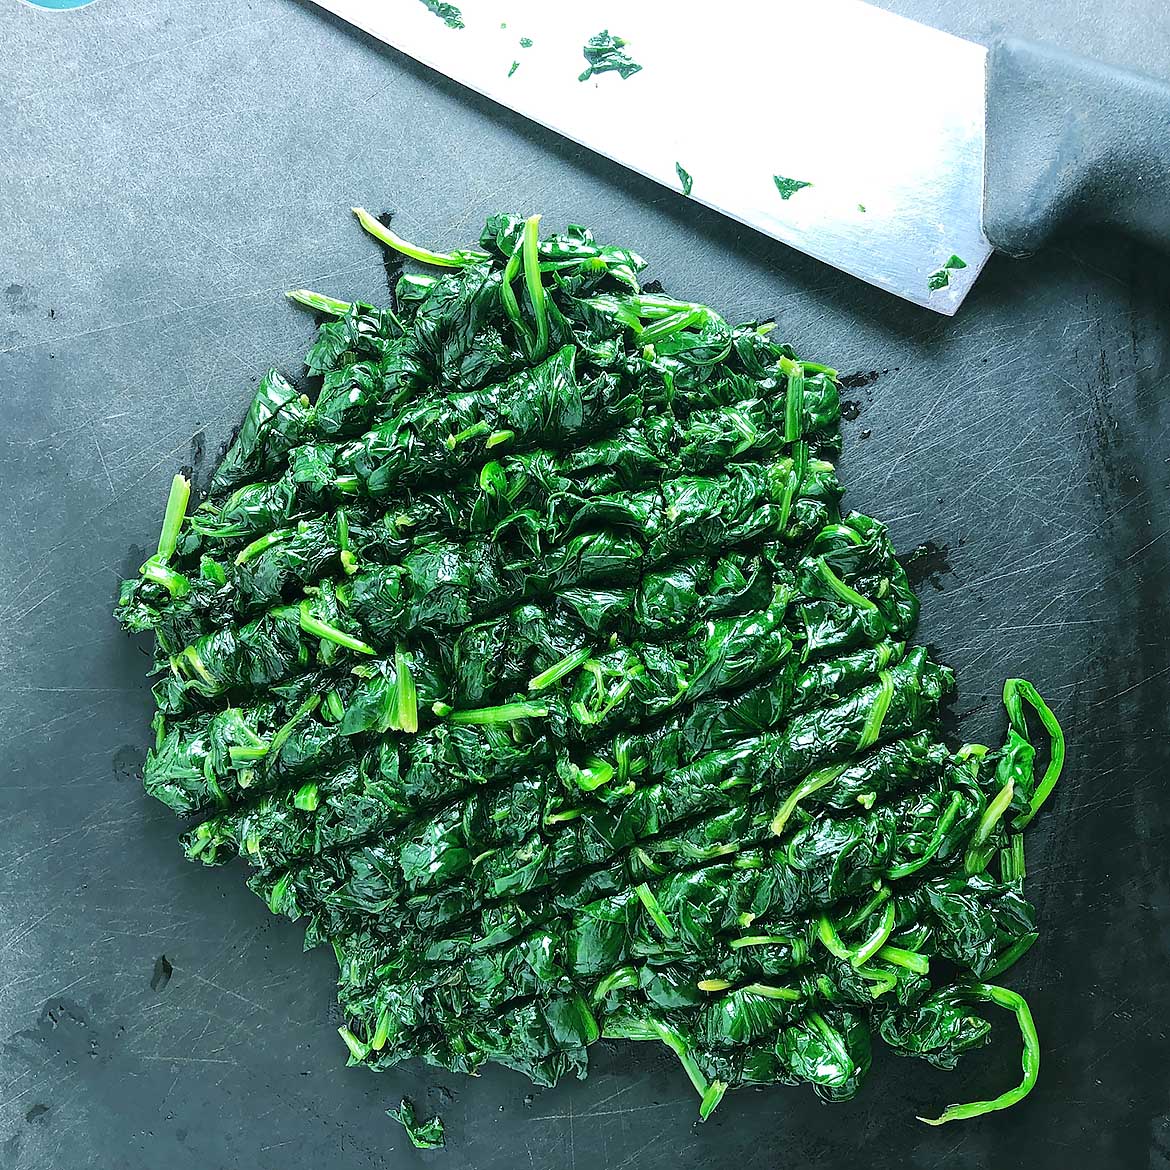 Top-down view of cooked, chopped spinach on a black cutting board, with knife